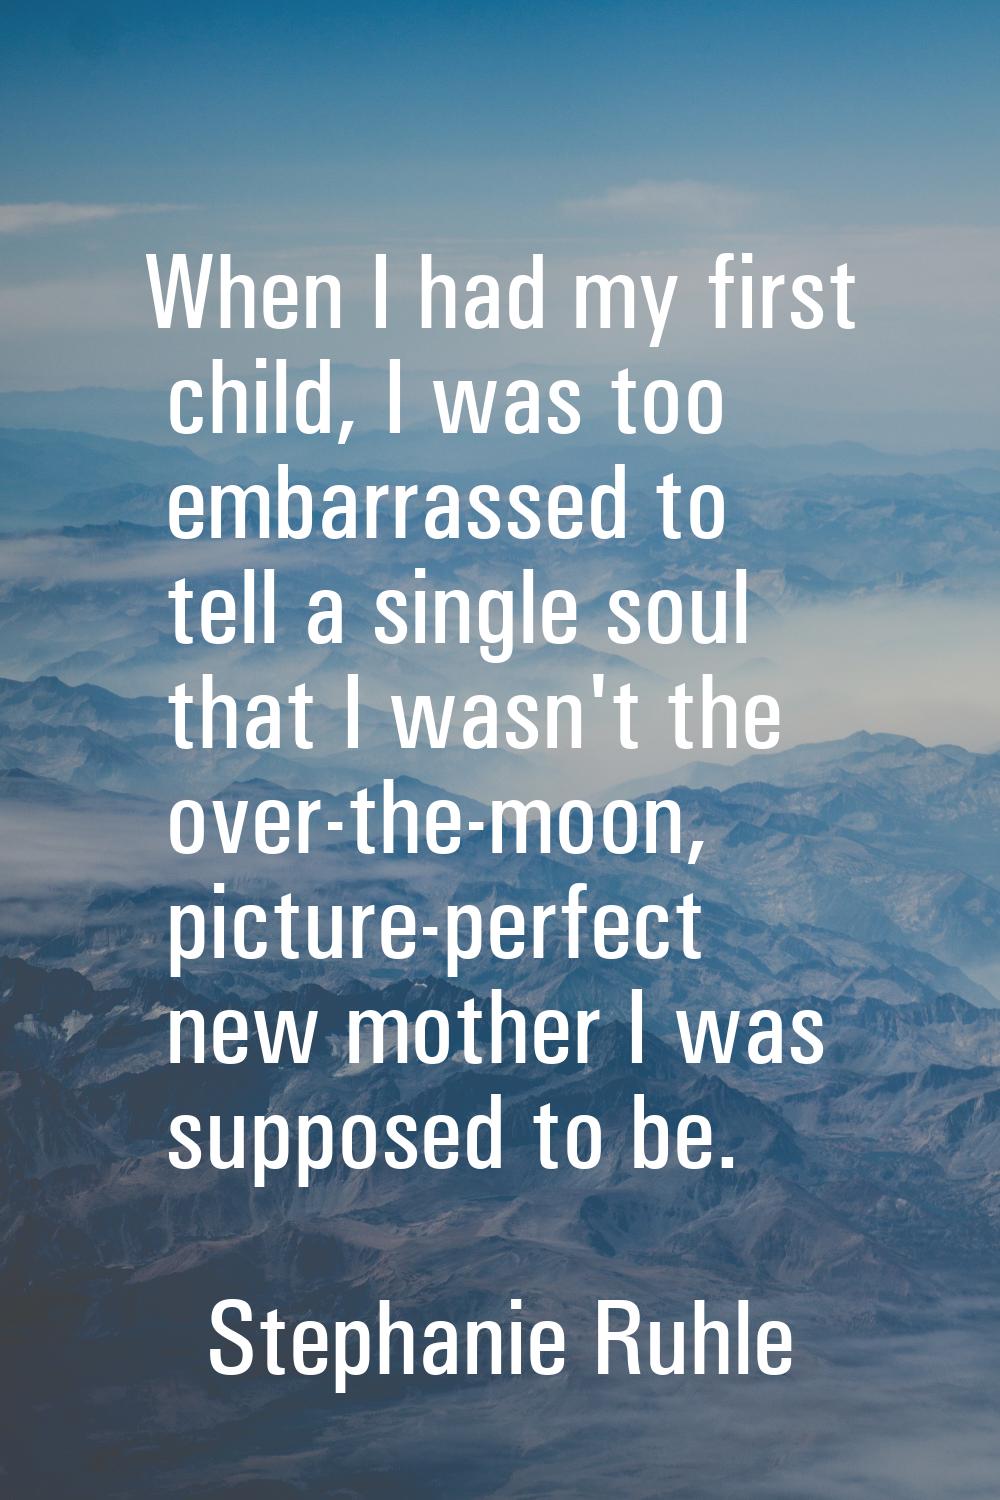 When I had my first child, I was too embarrassed to tell a single soul that I wasn't the over-the-m